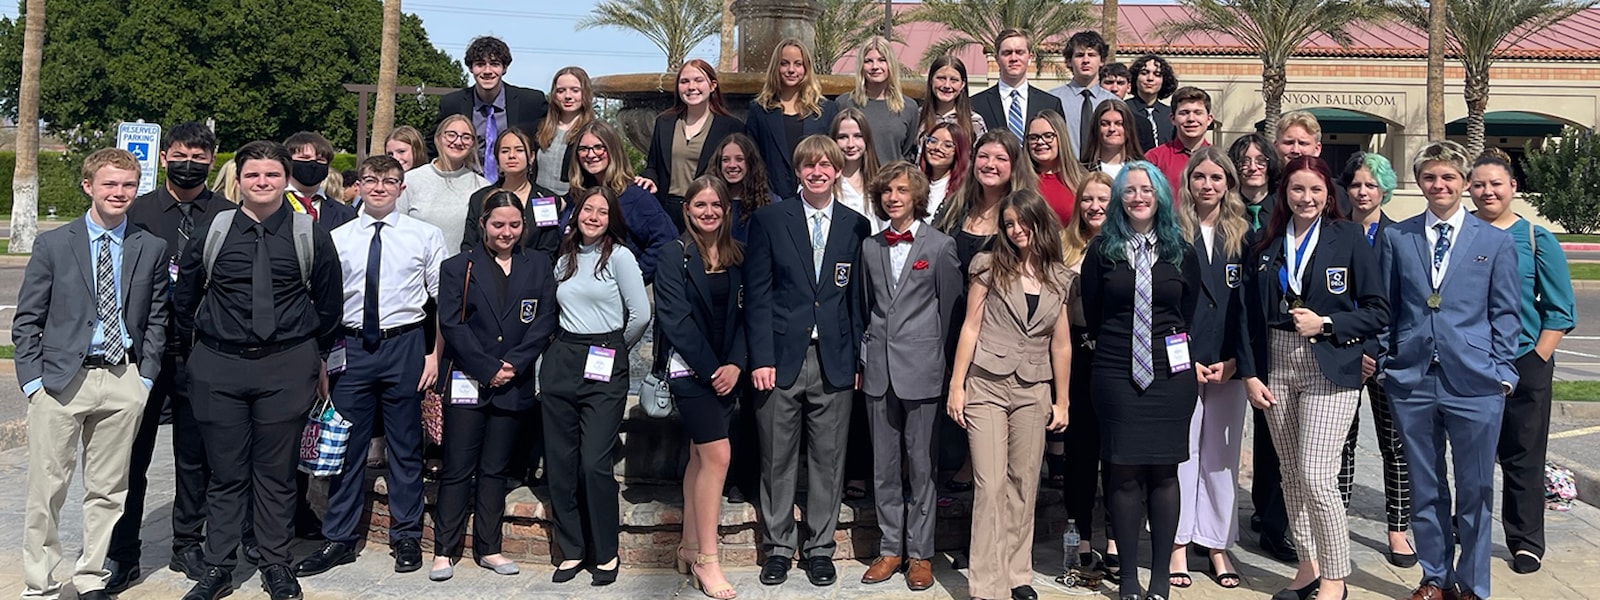 DECA students pose for photo at the state conference.